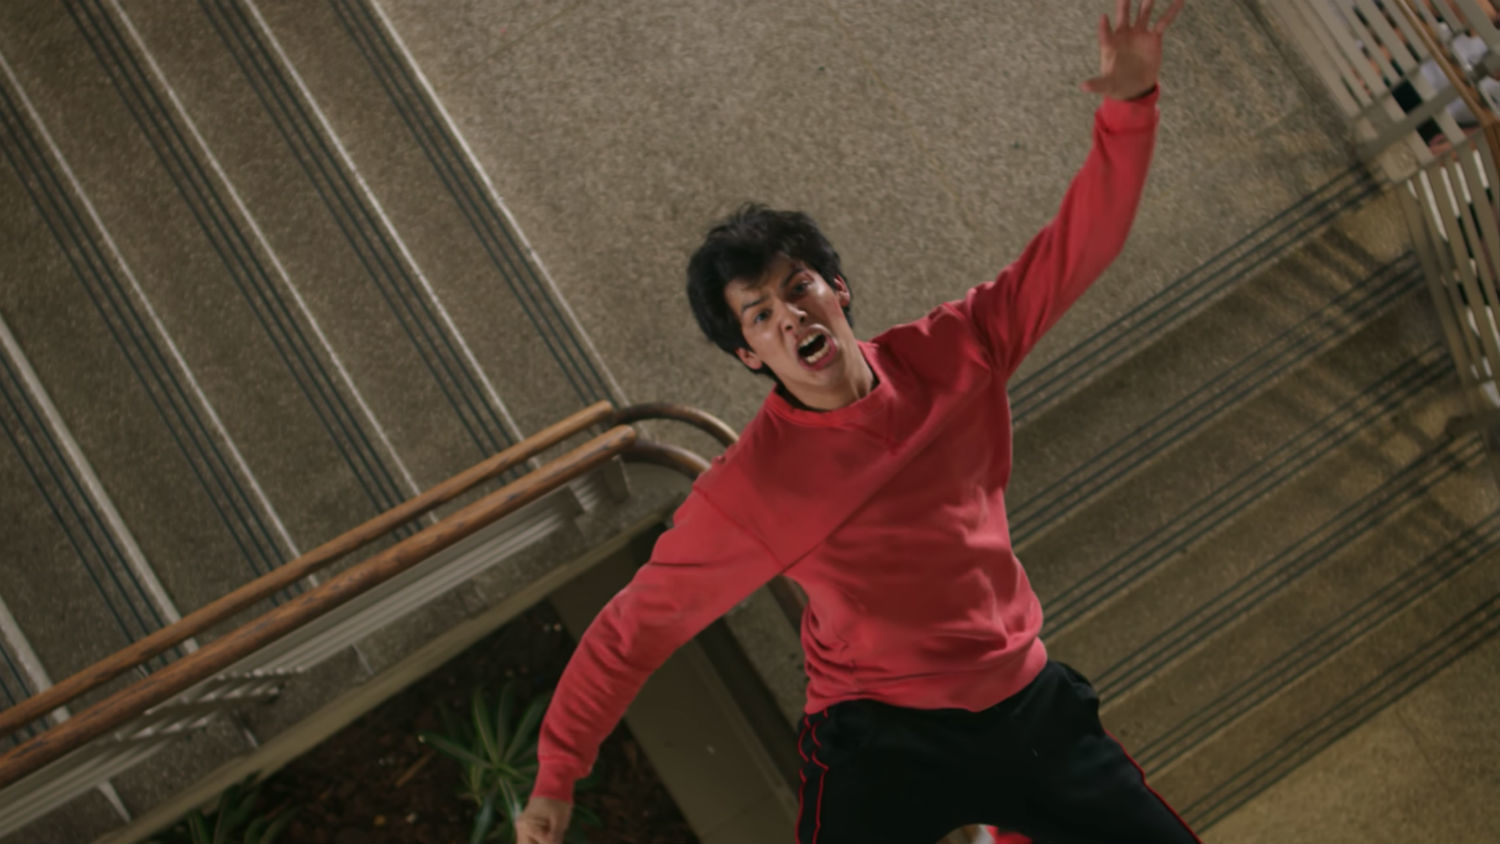 Miguel, clad in a red sweater, is mid-fall above the stairs.